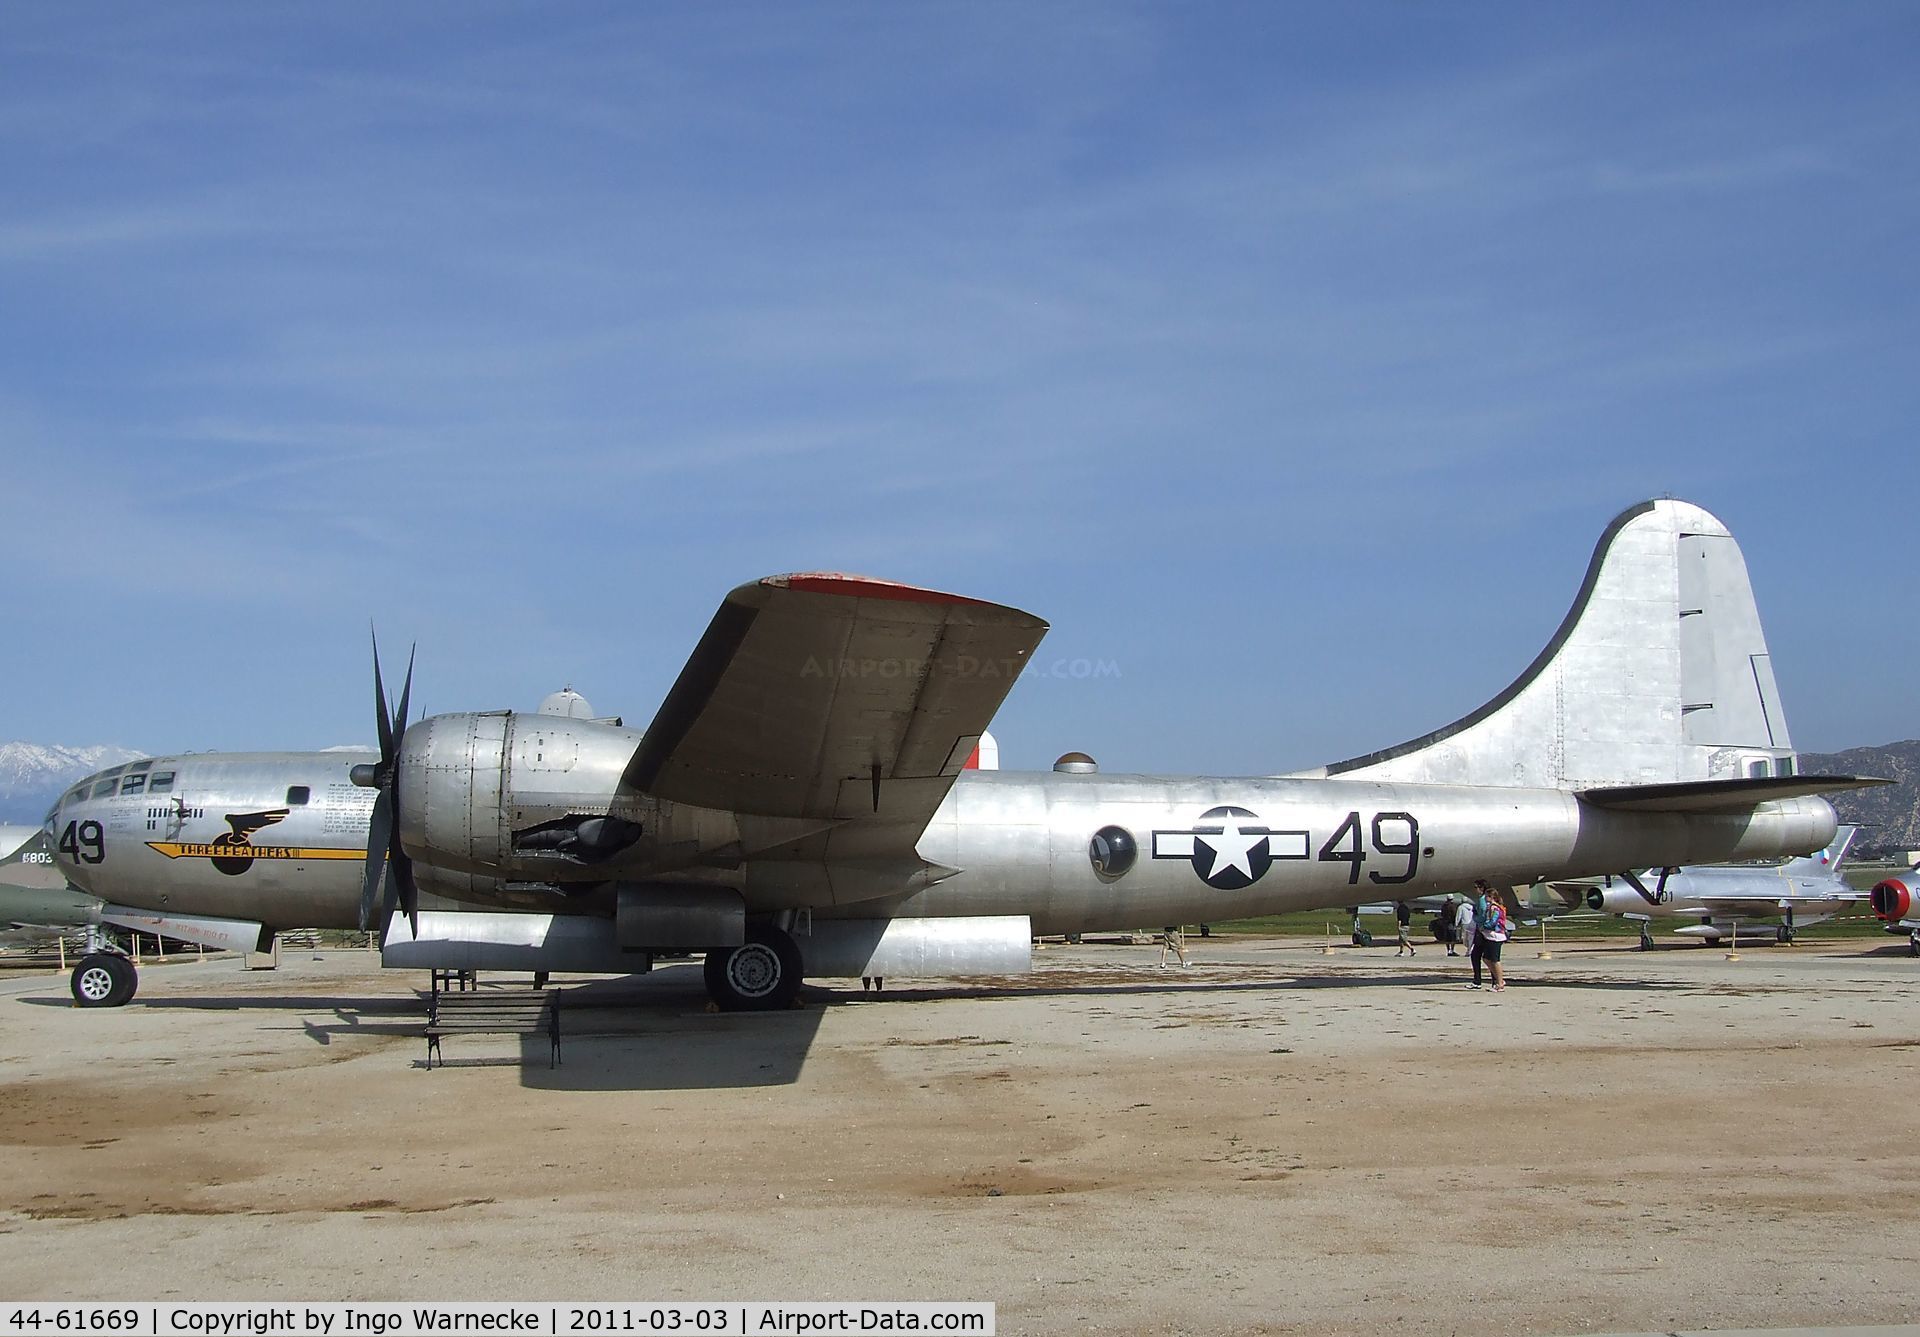 44-61669, 1944 Boeing B-29A Superfortress C/N 11146, Boeing B-29A Superfortress at the March Field Air Museum, Riverside CA